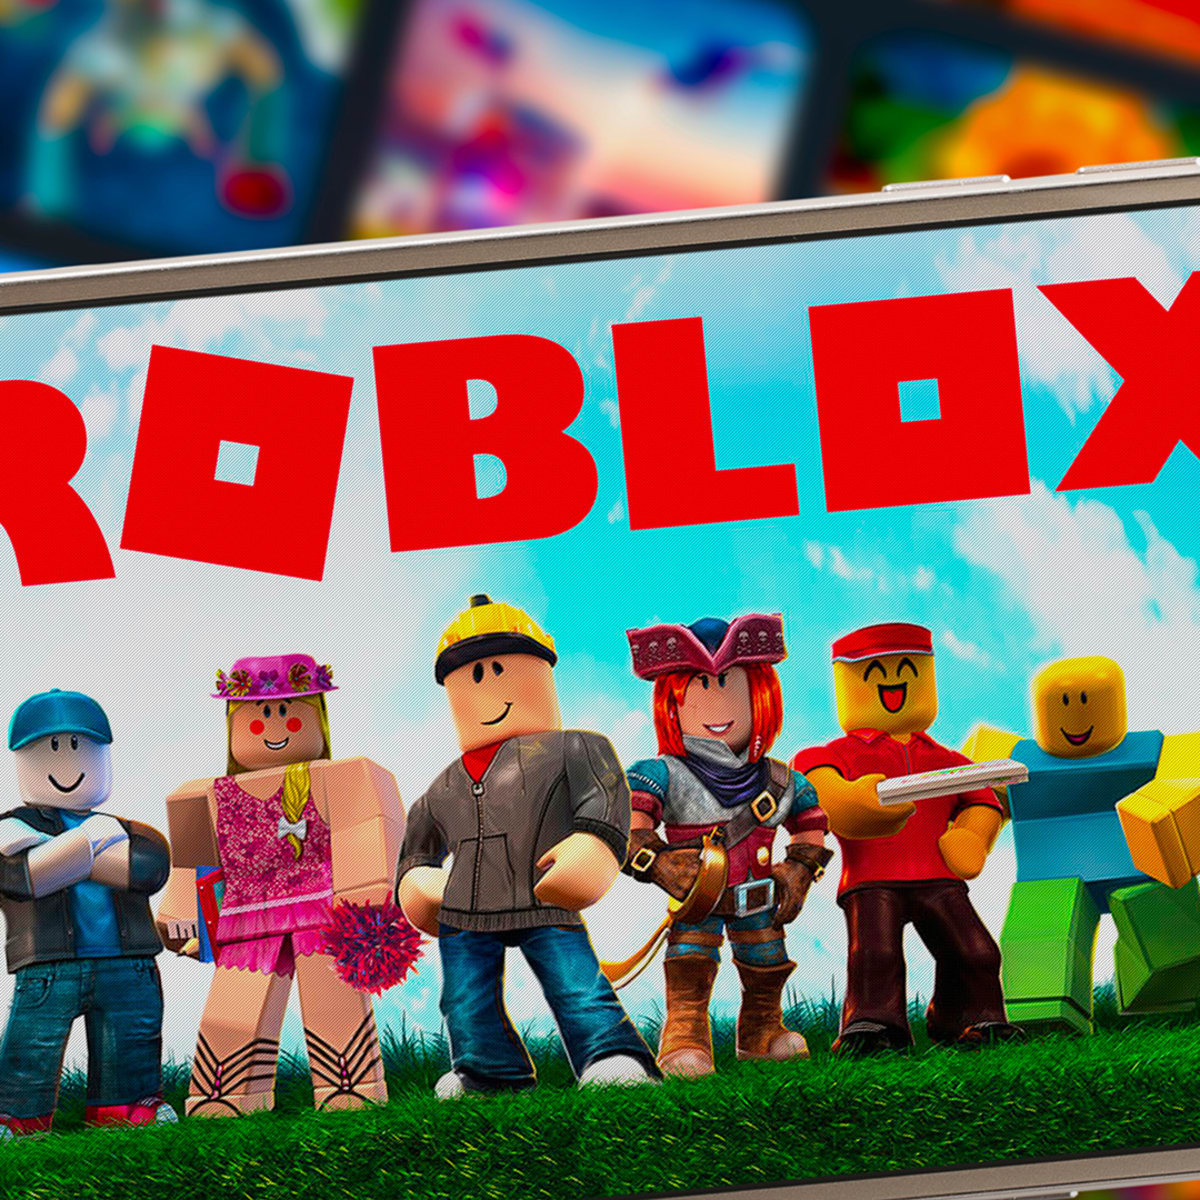 Roblox Stock: An Asymmetric Bet On The Metaverse (NYSE:RBLX